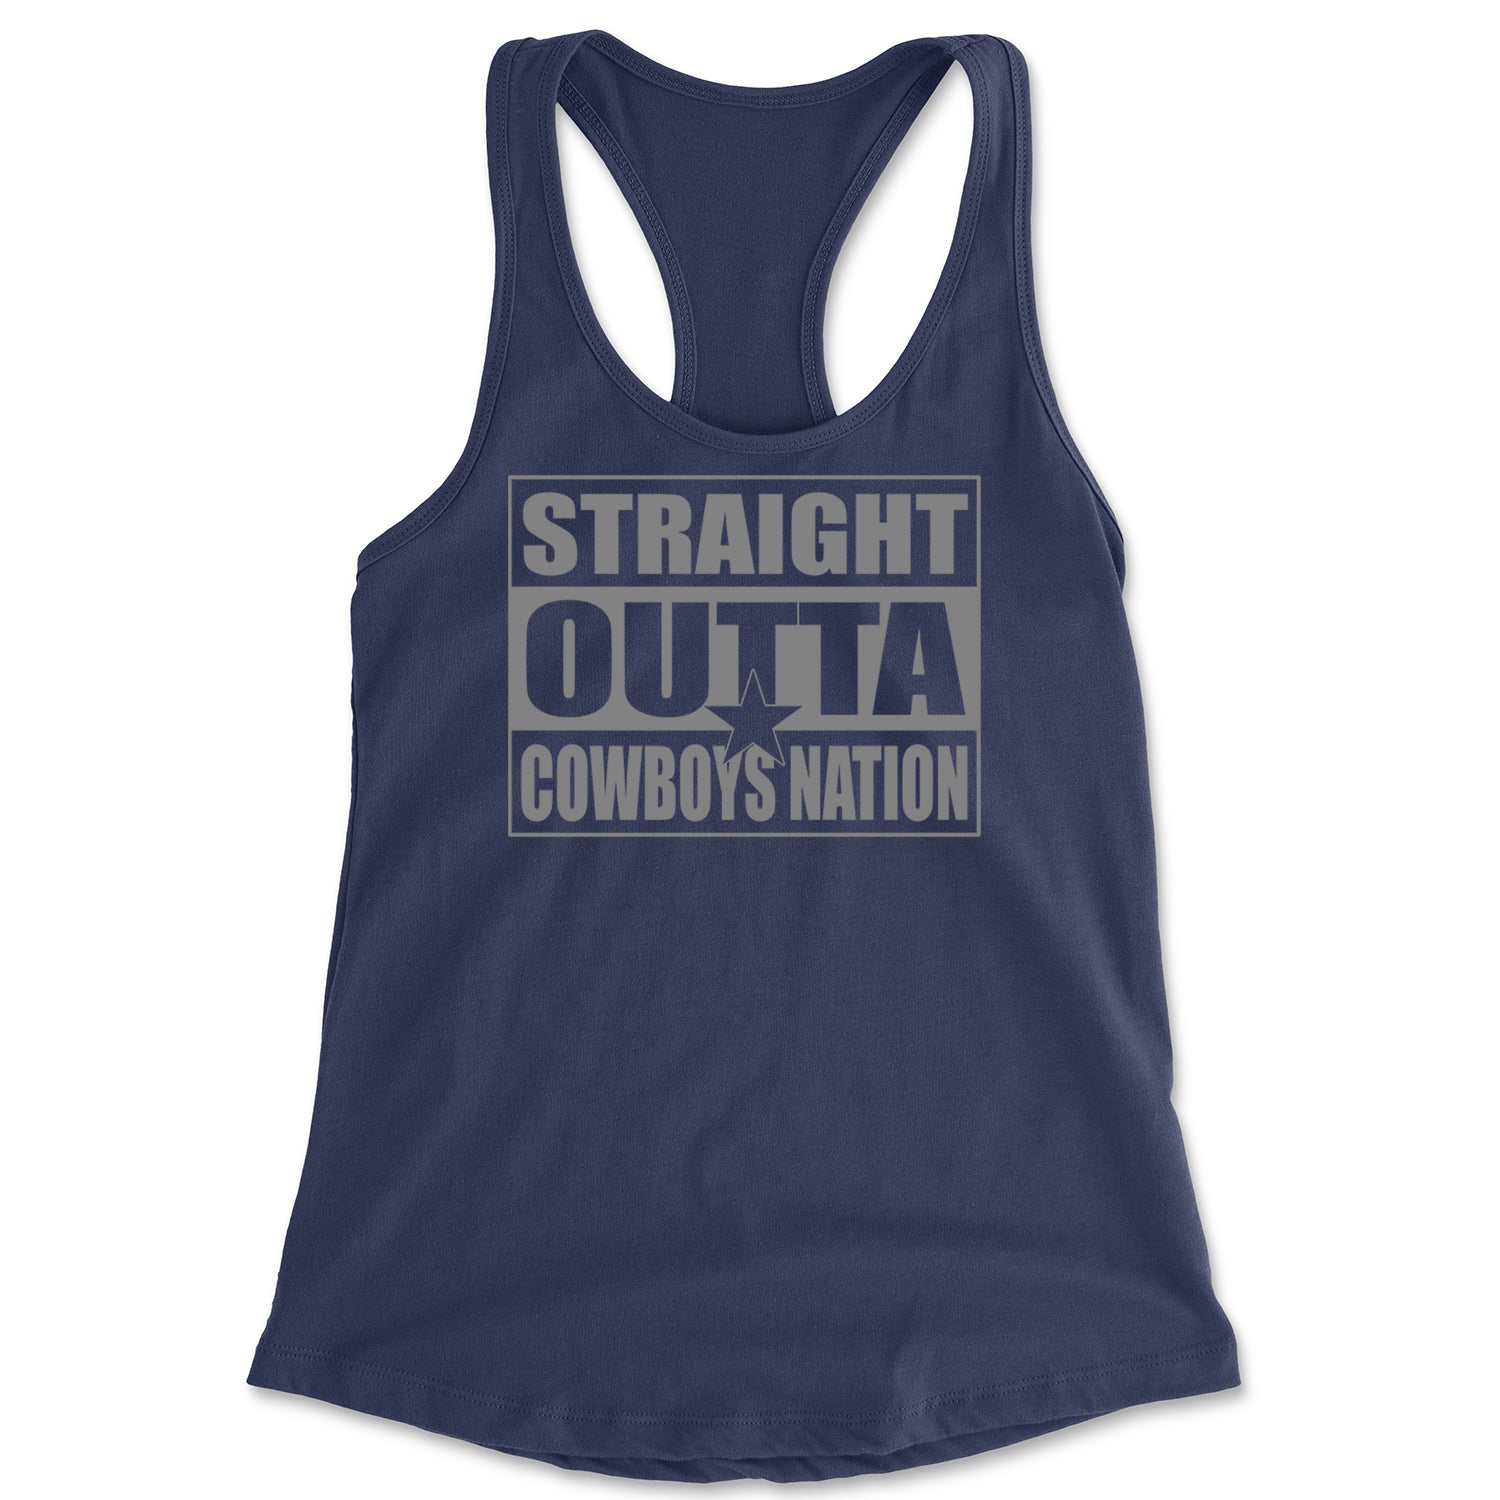 Straight Outta Cowboys Nation   Racerback Tank Top for Women